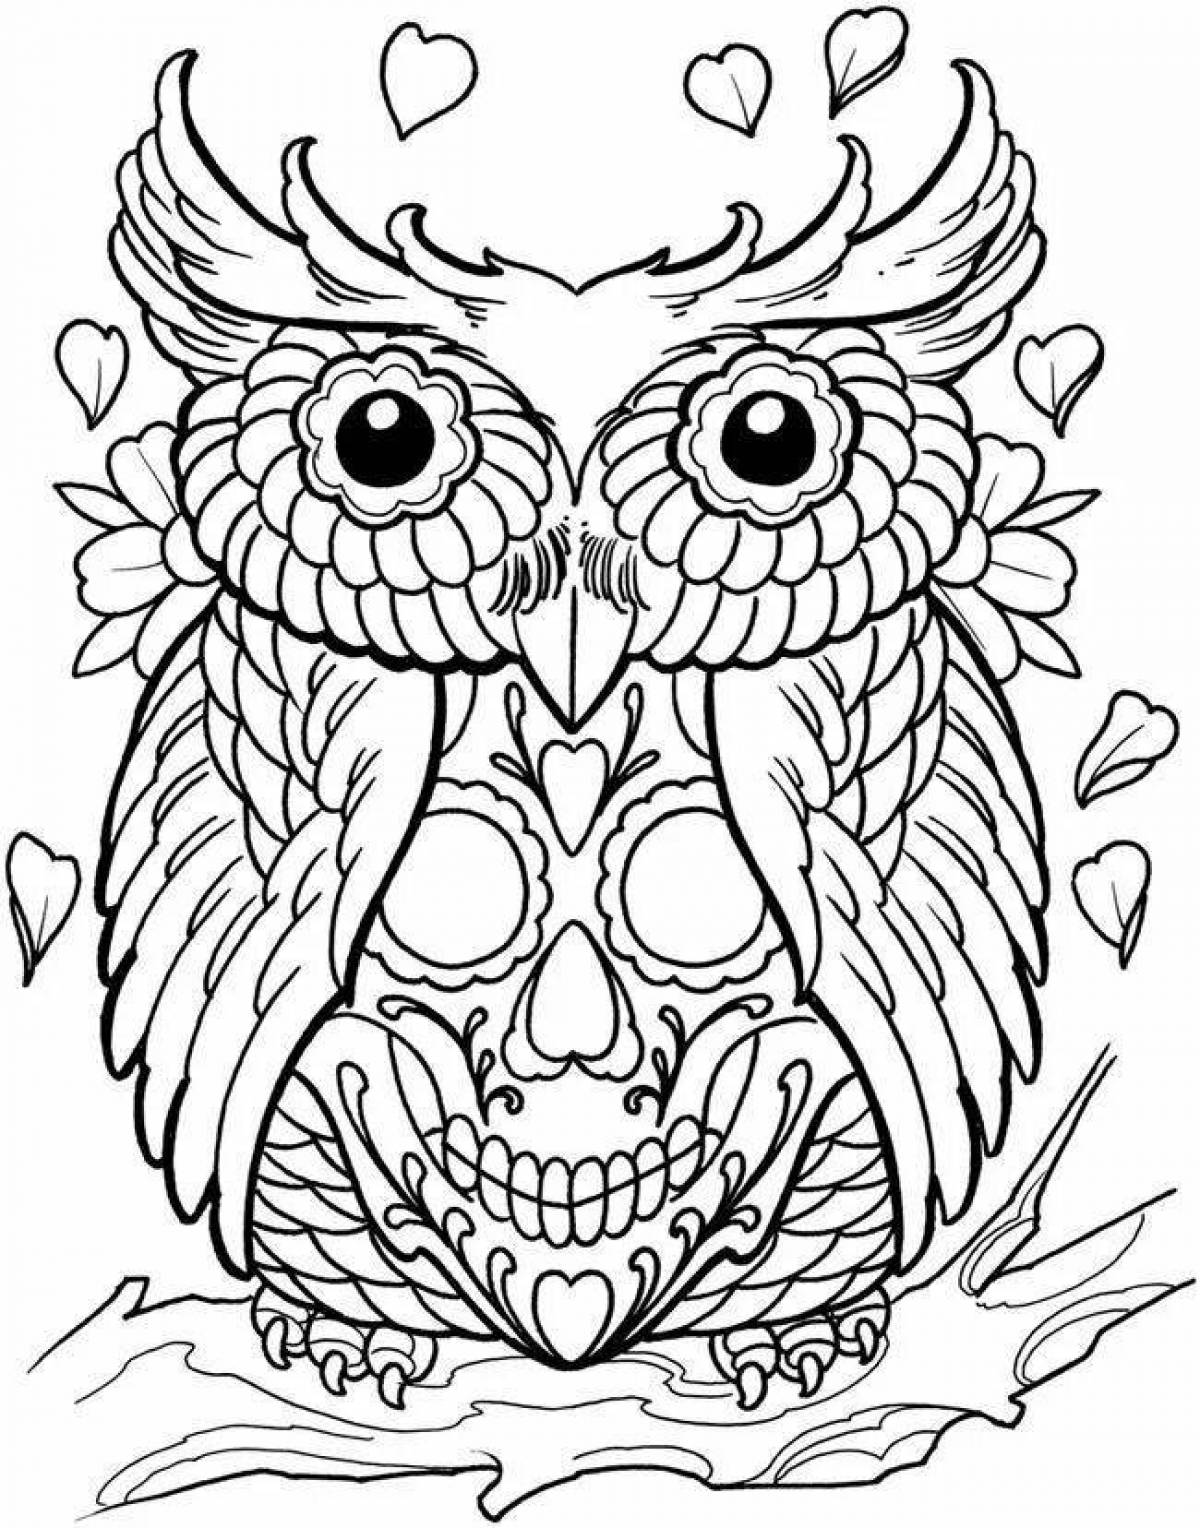 Surreal tattoo coloring page